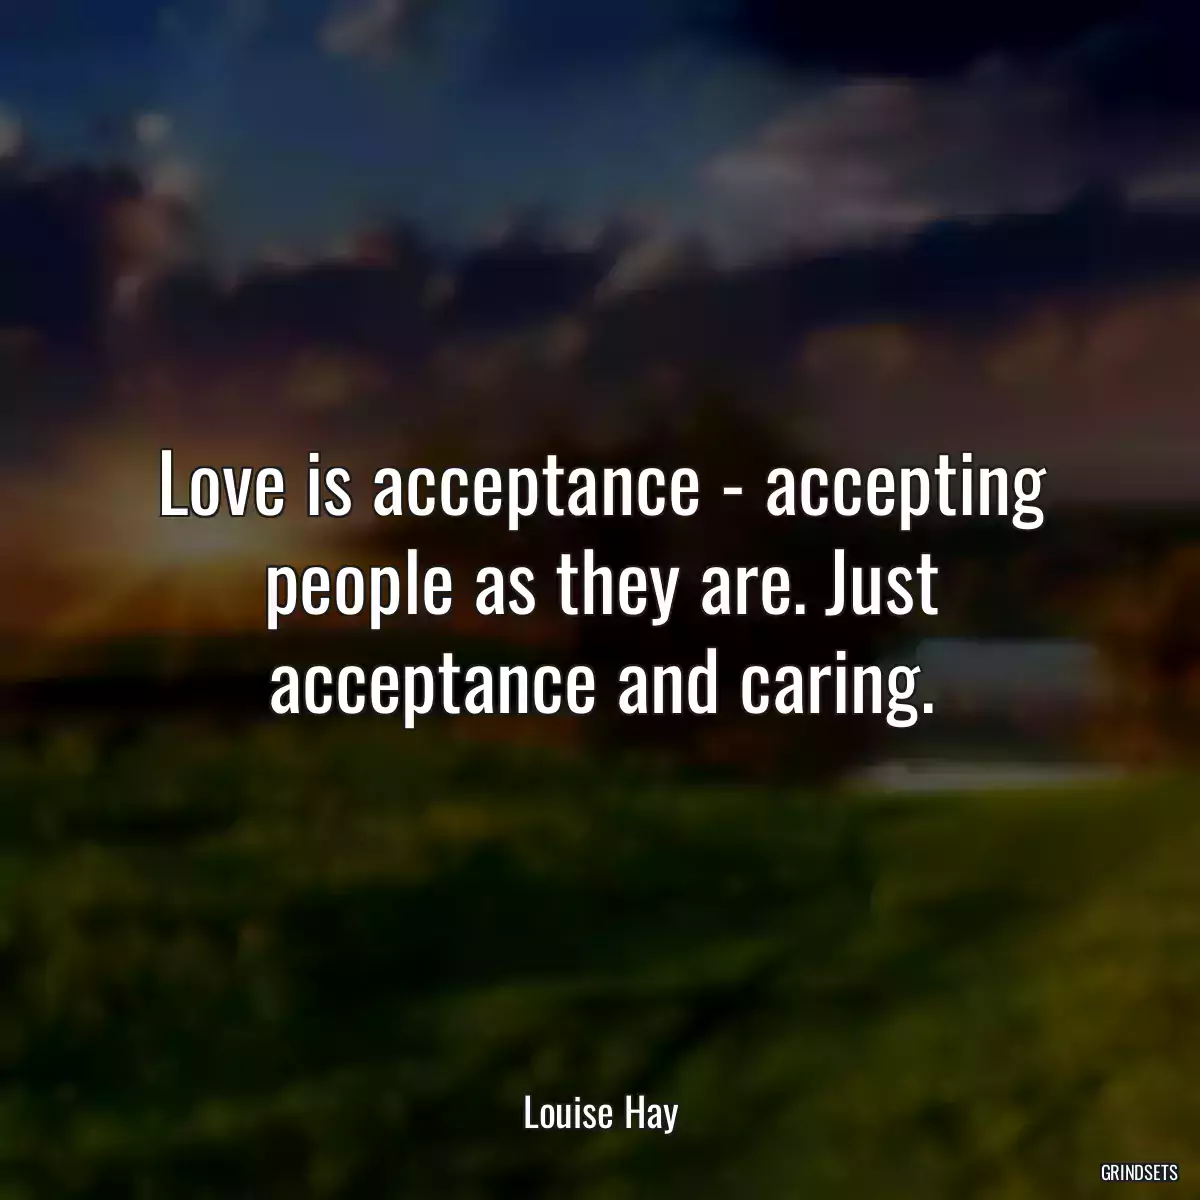 Love is acceptance - accepting people as they are. Just acceptance and caring.